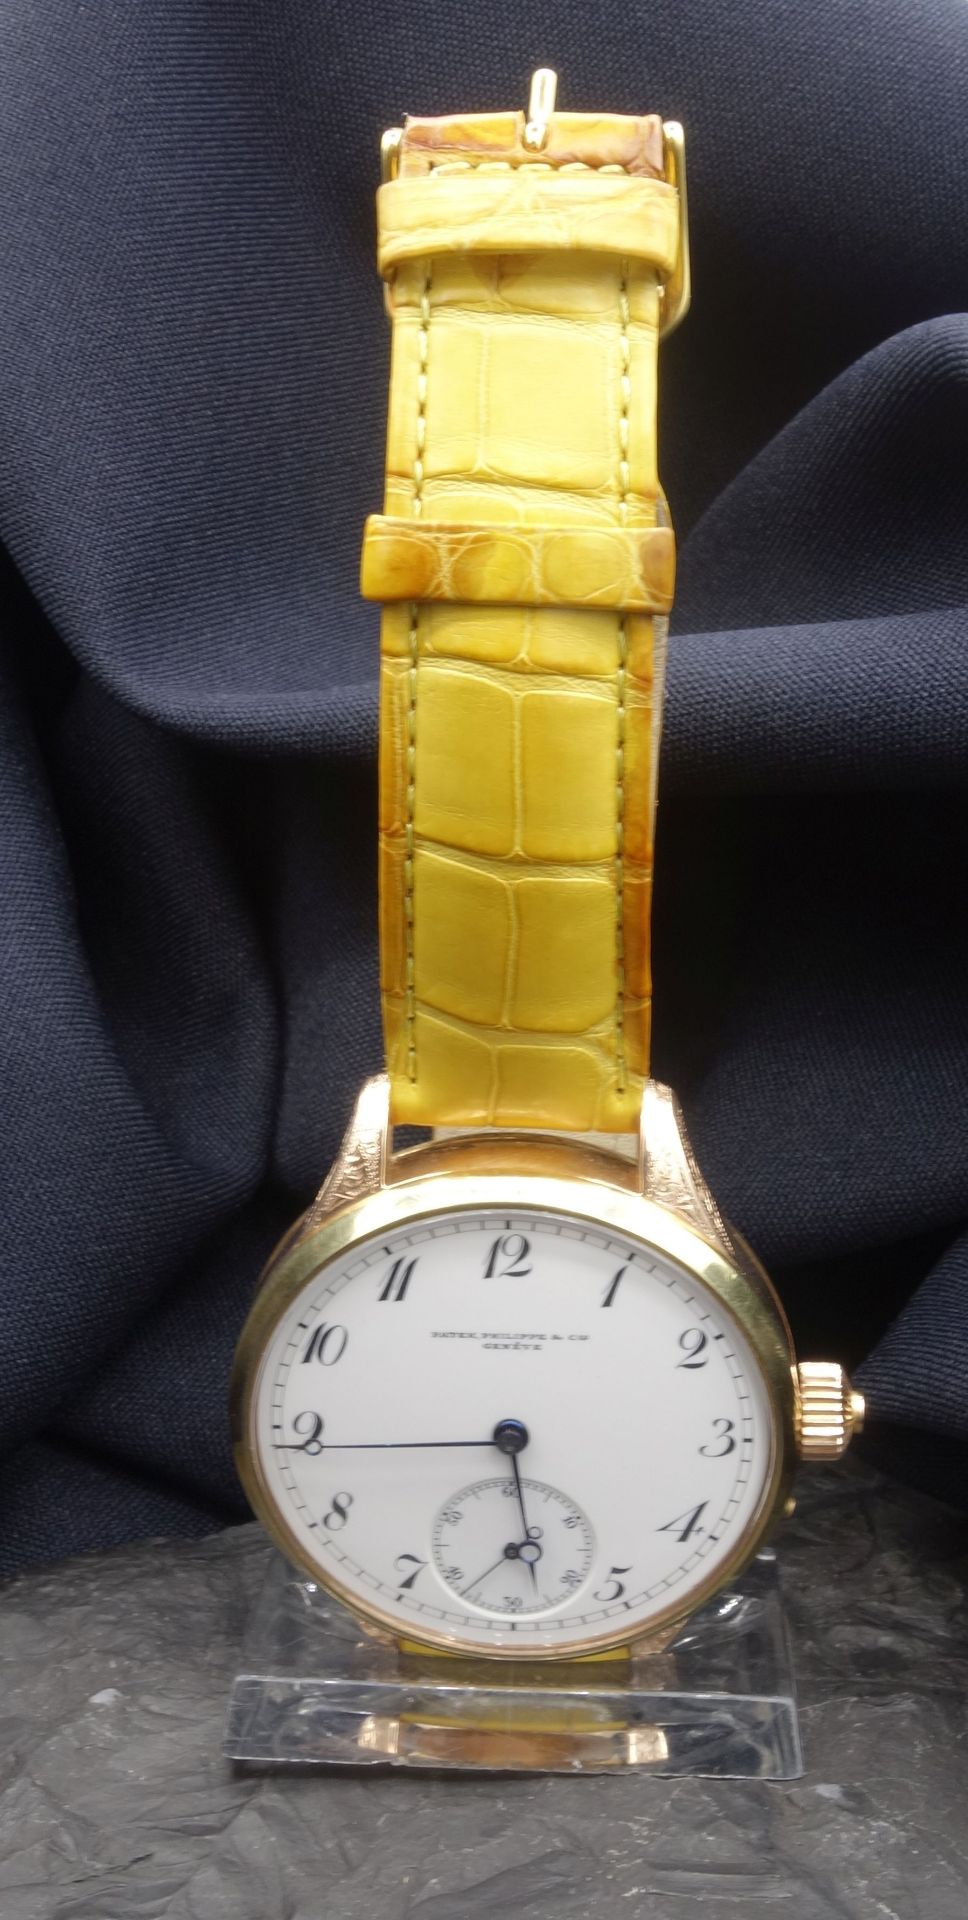 MARIAGE: WRIST WATCH FROM PATEK PHILIPPE POCKET WATCH - Image 2 of 8